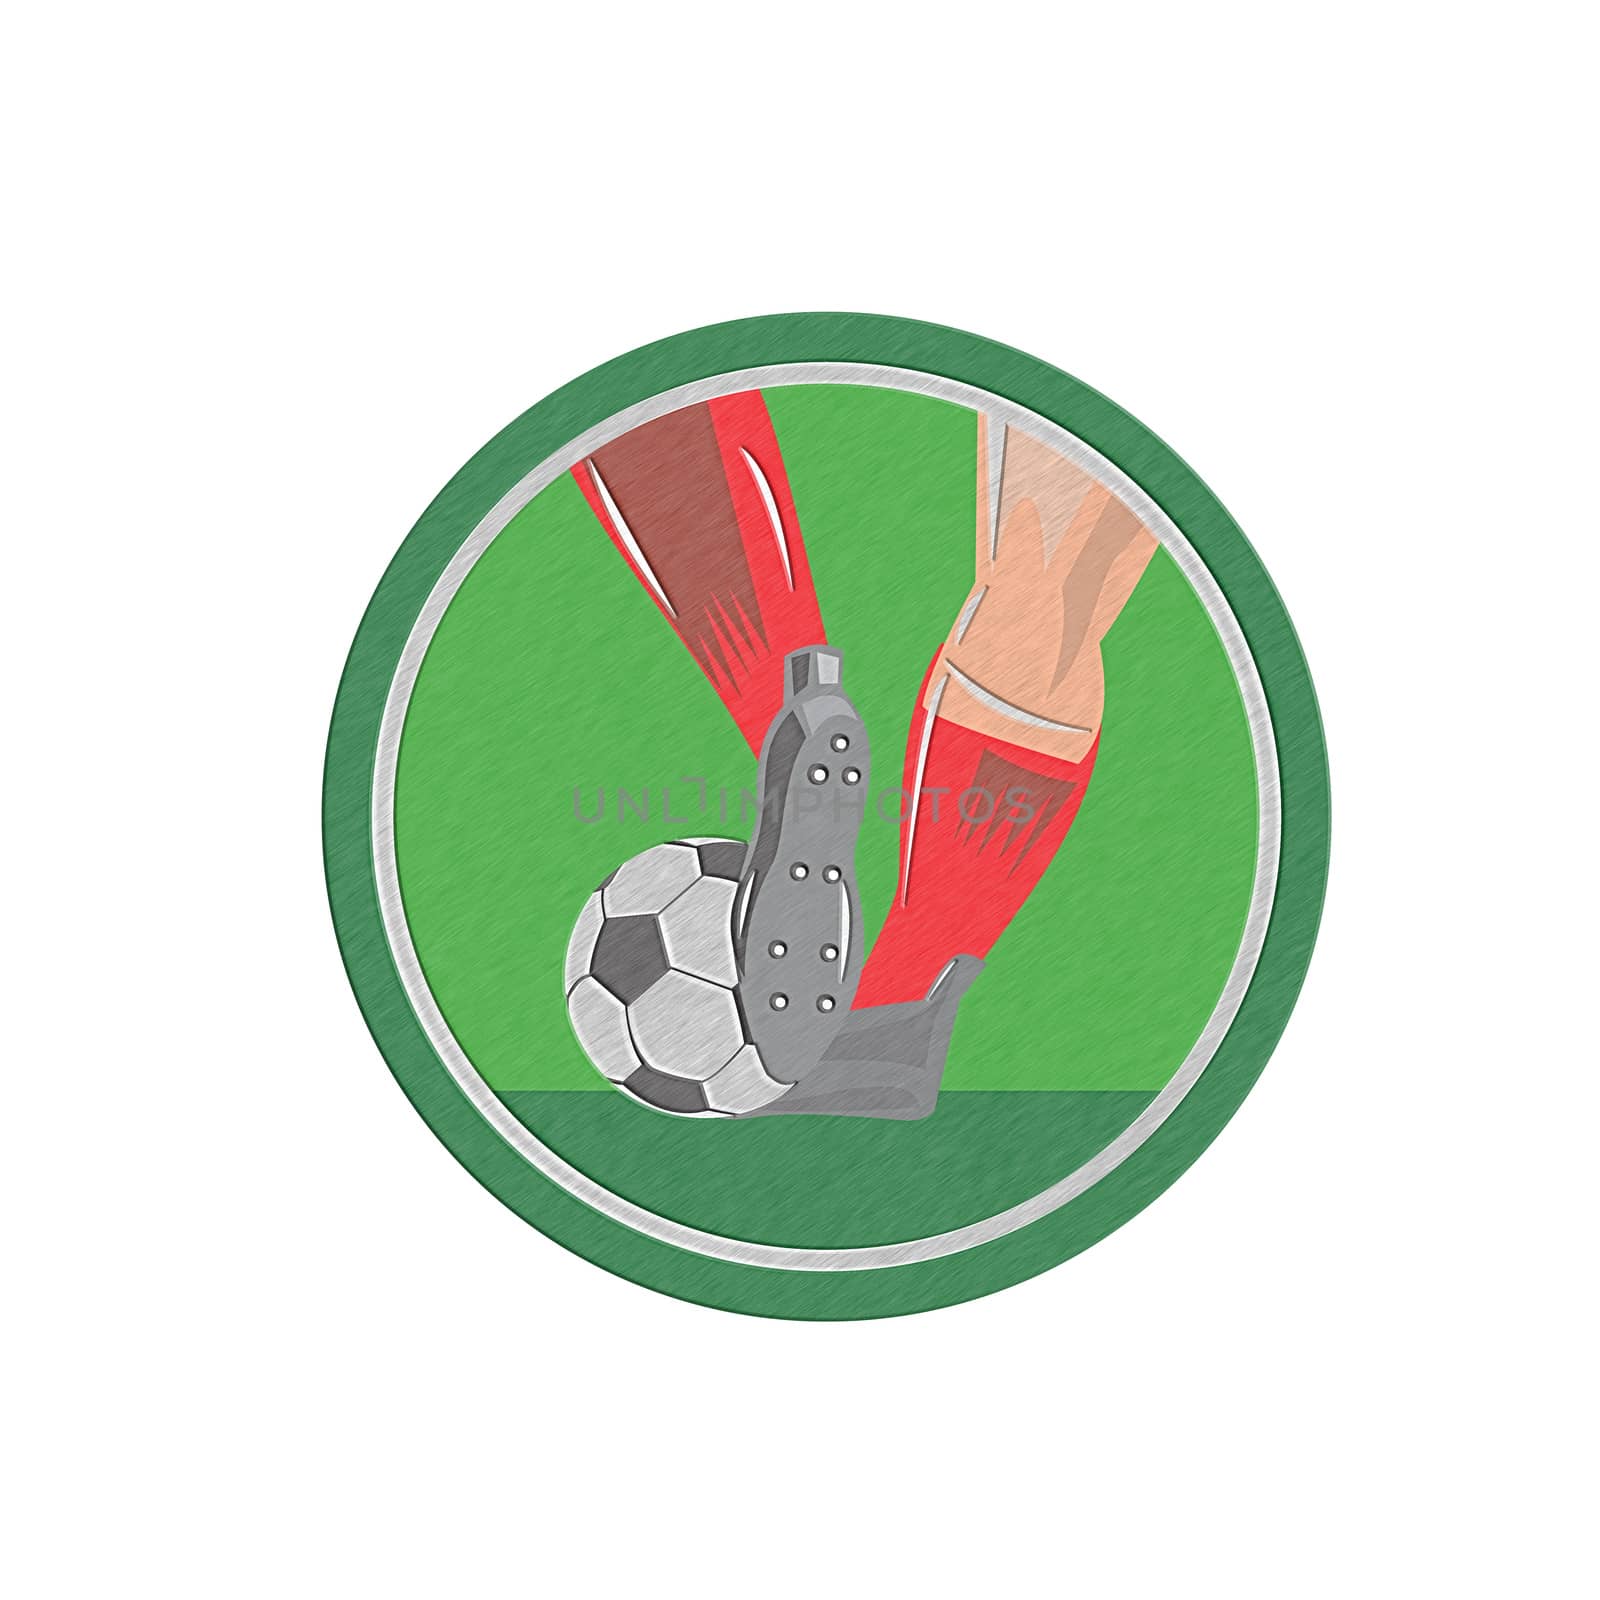 Metallic styled illustration of a leg foot kicking a soccer ball set inside circle done in retro style.